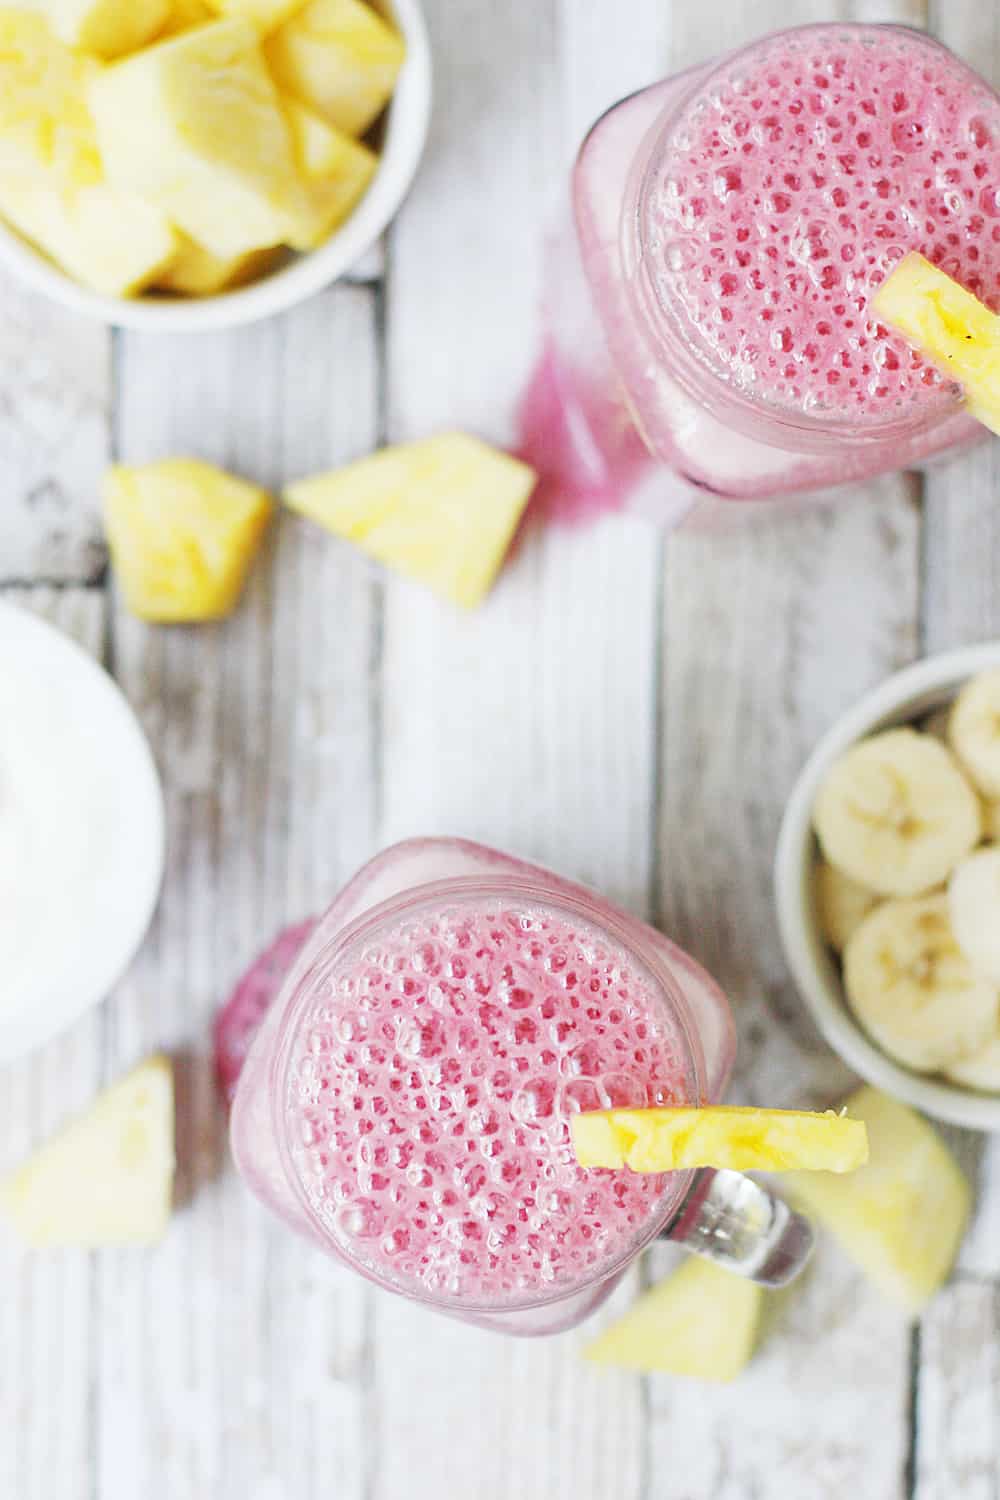 4-Ingredient Pineapple Cranberry Smoothie -- Cranberry lovers will enjoy this 4-ingredient pineapple cranberry smoothie! It features all-natural cranberry juice, frozen pineapple and banana, and Greek yogurt for a tart, good-for-you smoothie! #smoothie #cranberry #whatsyourjuicemadeof @walmart #KnudsenFarmToBottle #pineapple #drink #healthyrecipe #ad